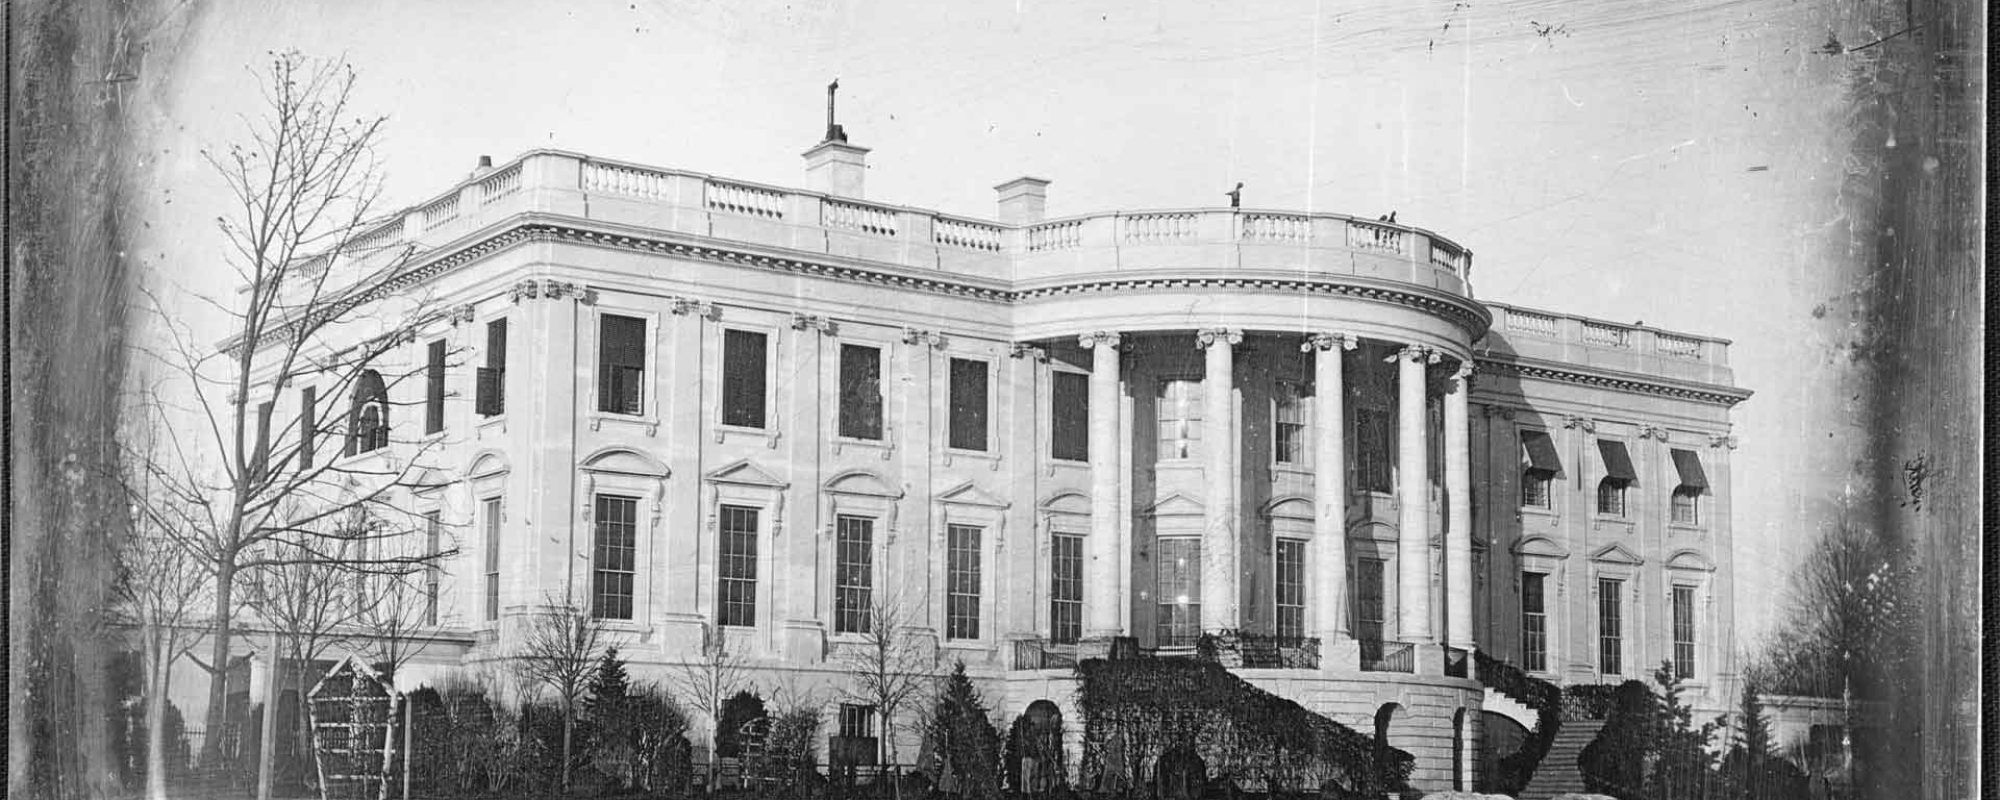 The Architecture of the White House